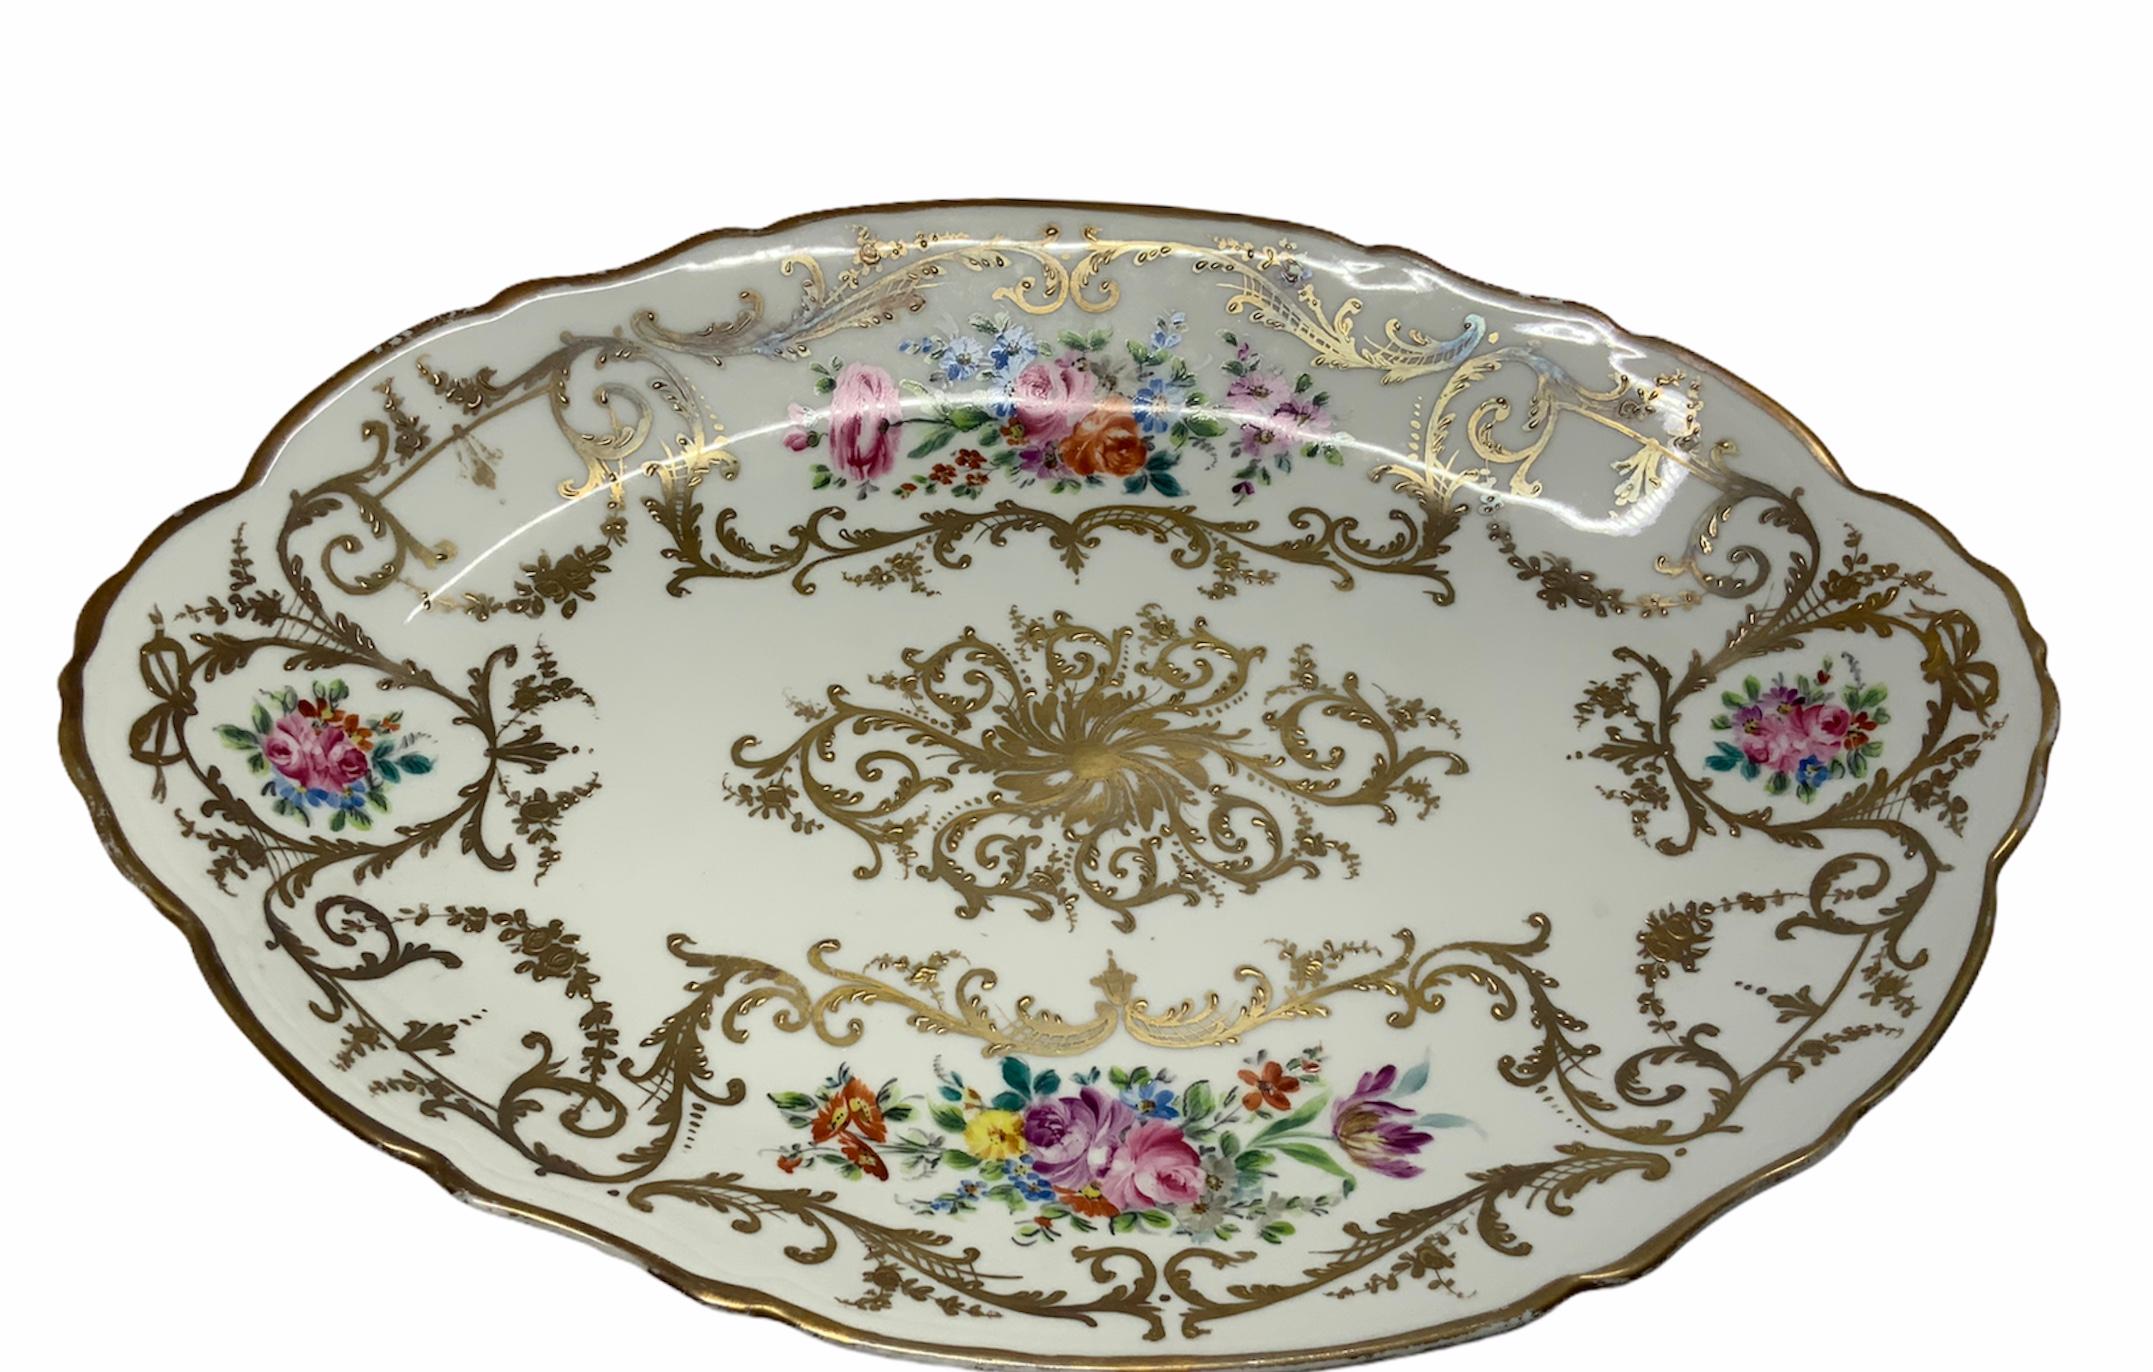 Camille Le Tallec Handpainted Porcelain Tureen In Good Condition For Sale In Guaynabo, PR